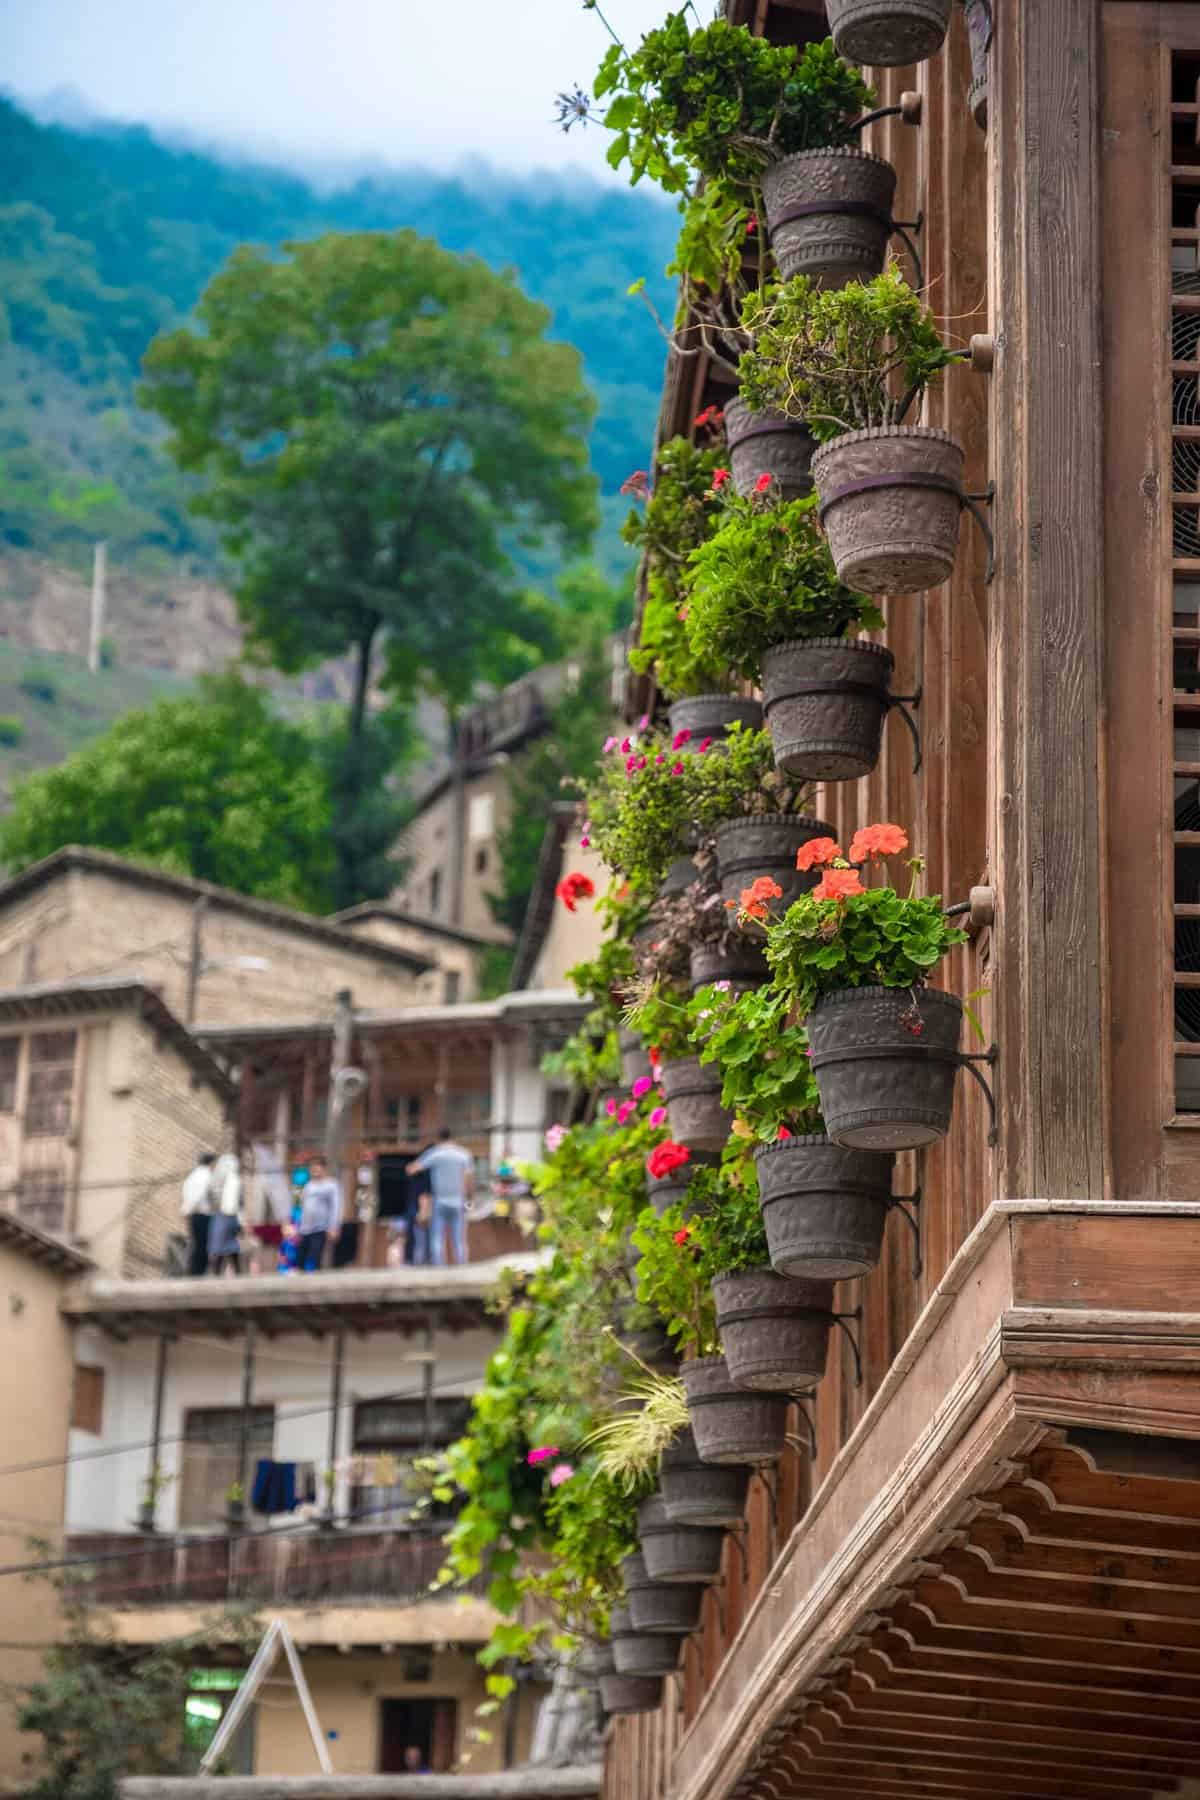 Potted plants on a balcony in an Iranian town 